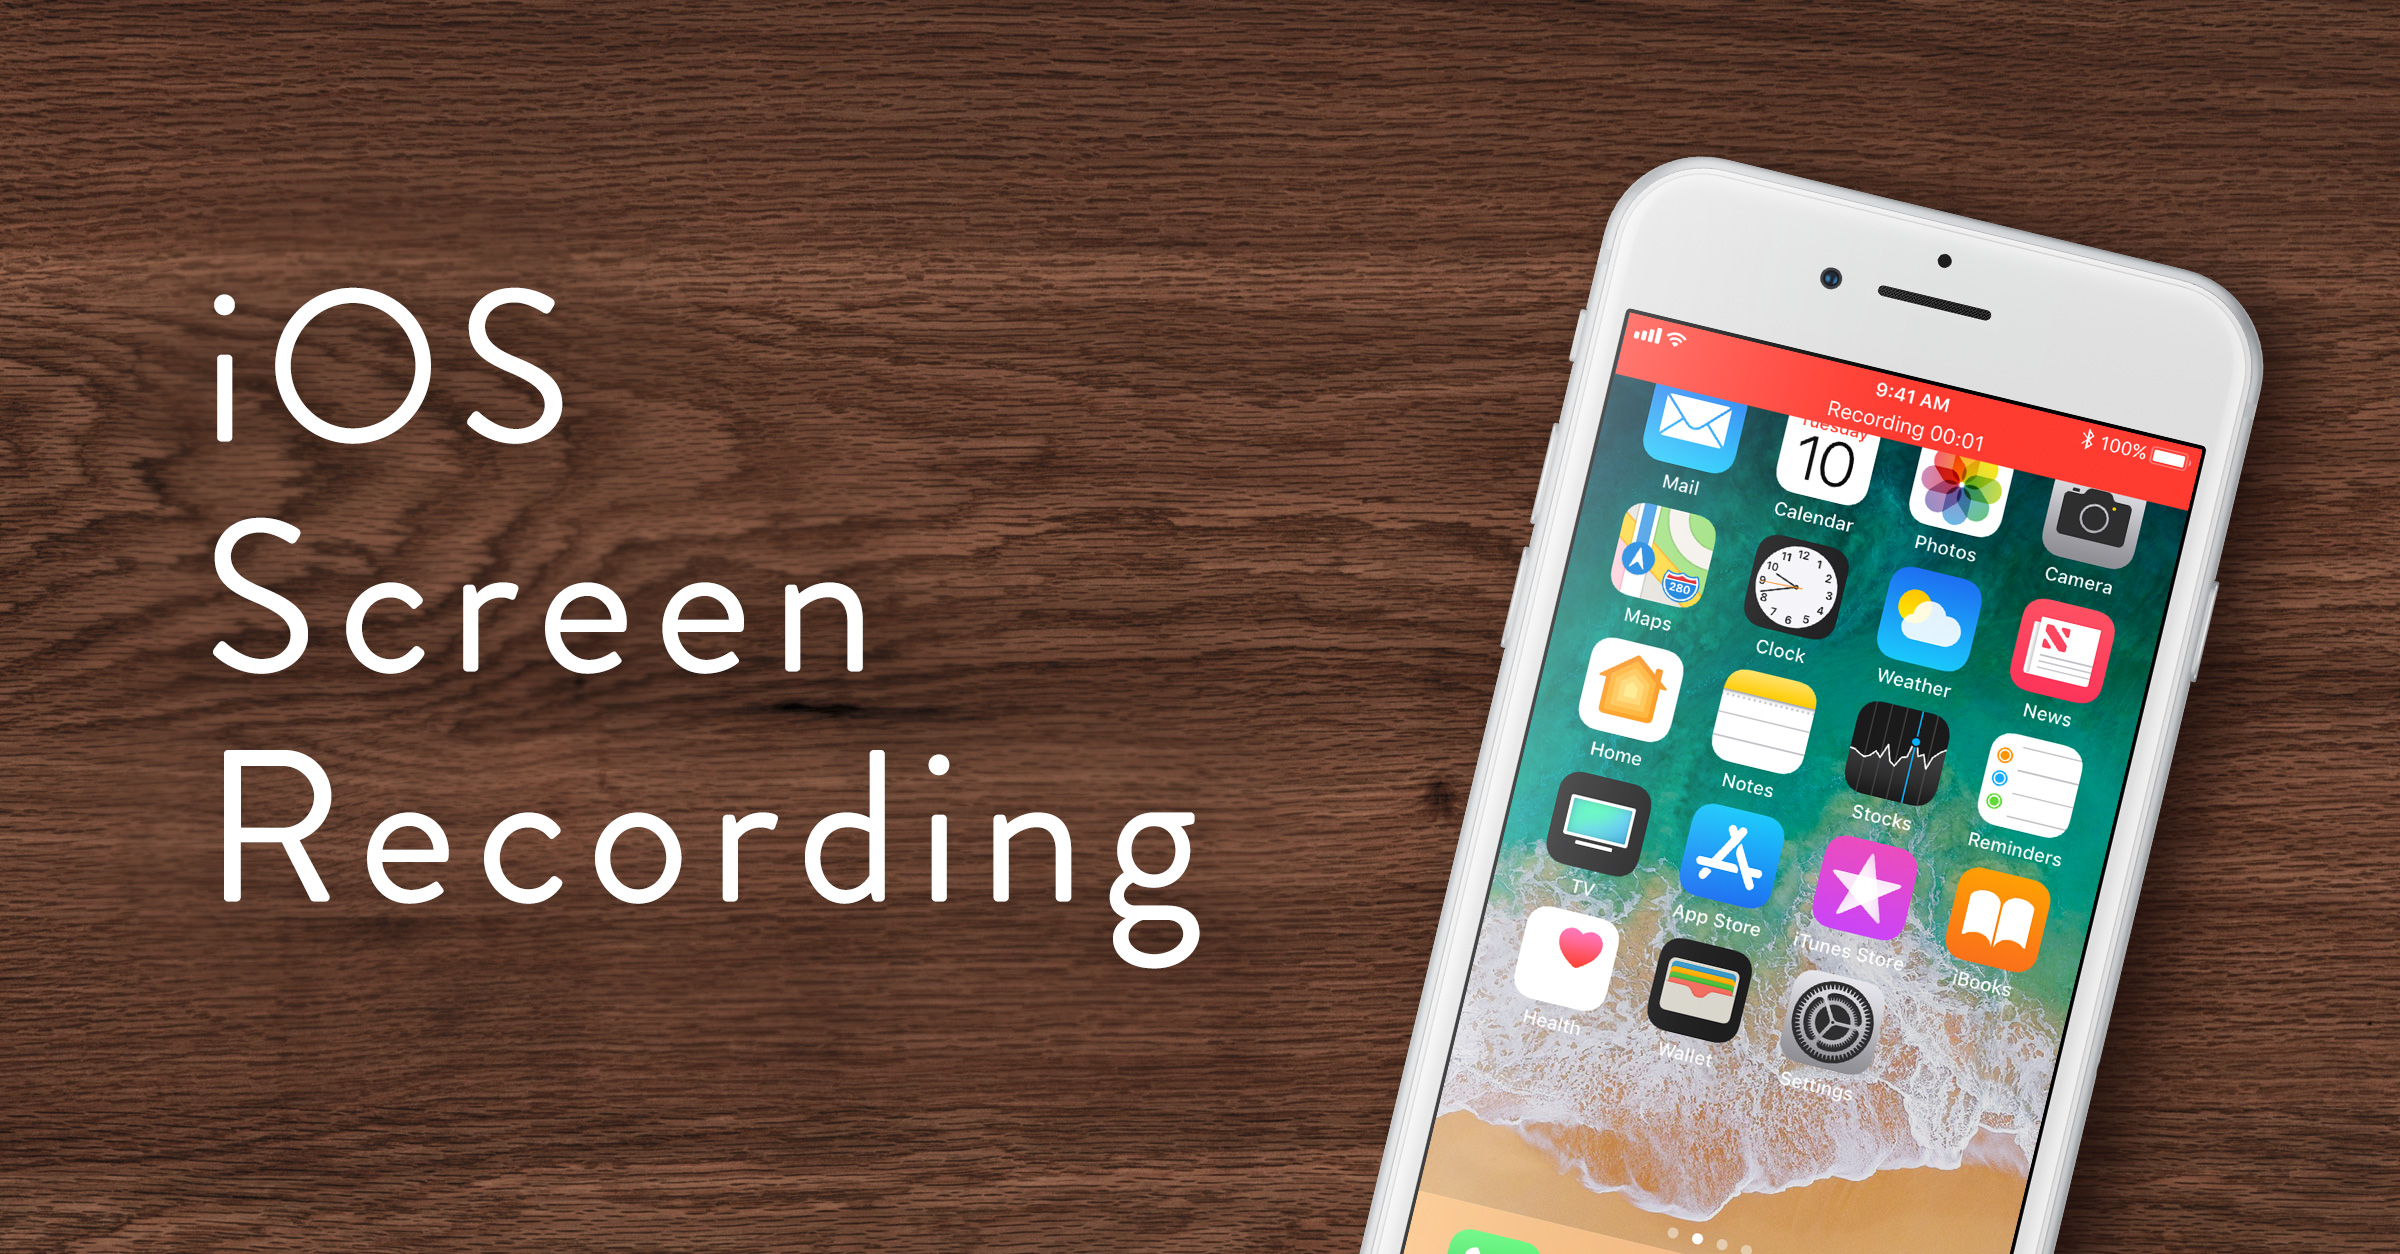 How To Use Screen Recording On Your Iphone Ipad Or Ipod Touch - how to record roblox on iphone 6